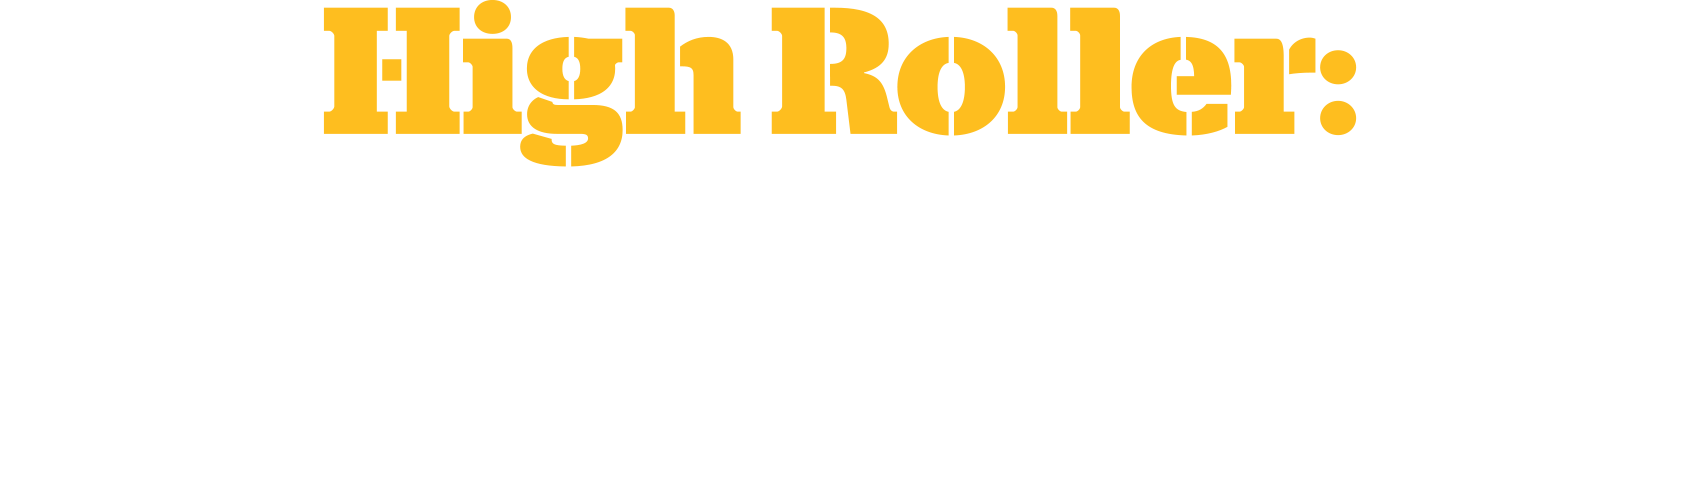 High Roller: Building a Maxed-Out Chassis typography